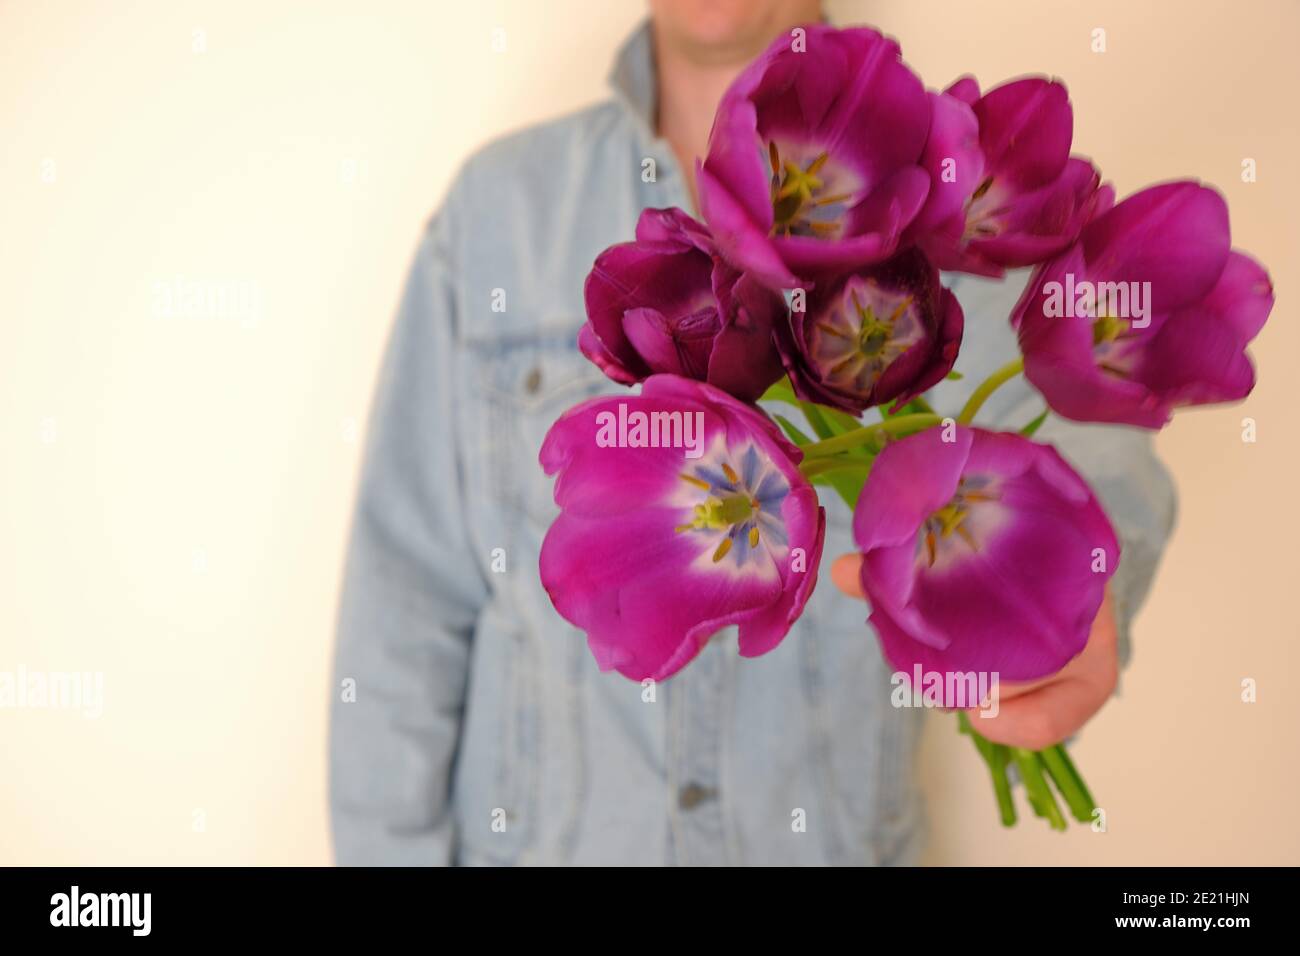 A bouquet of lilac tulips in men's hands. A man gives flowers.  Stock Photo